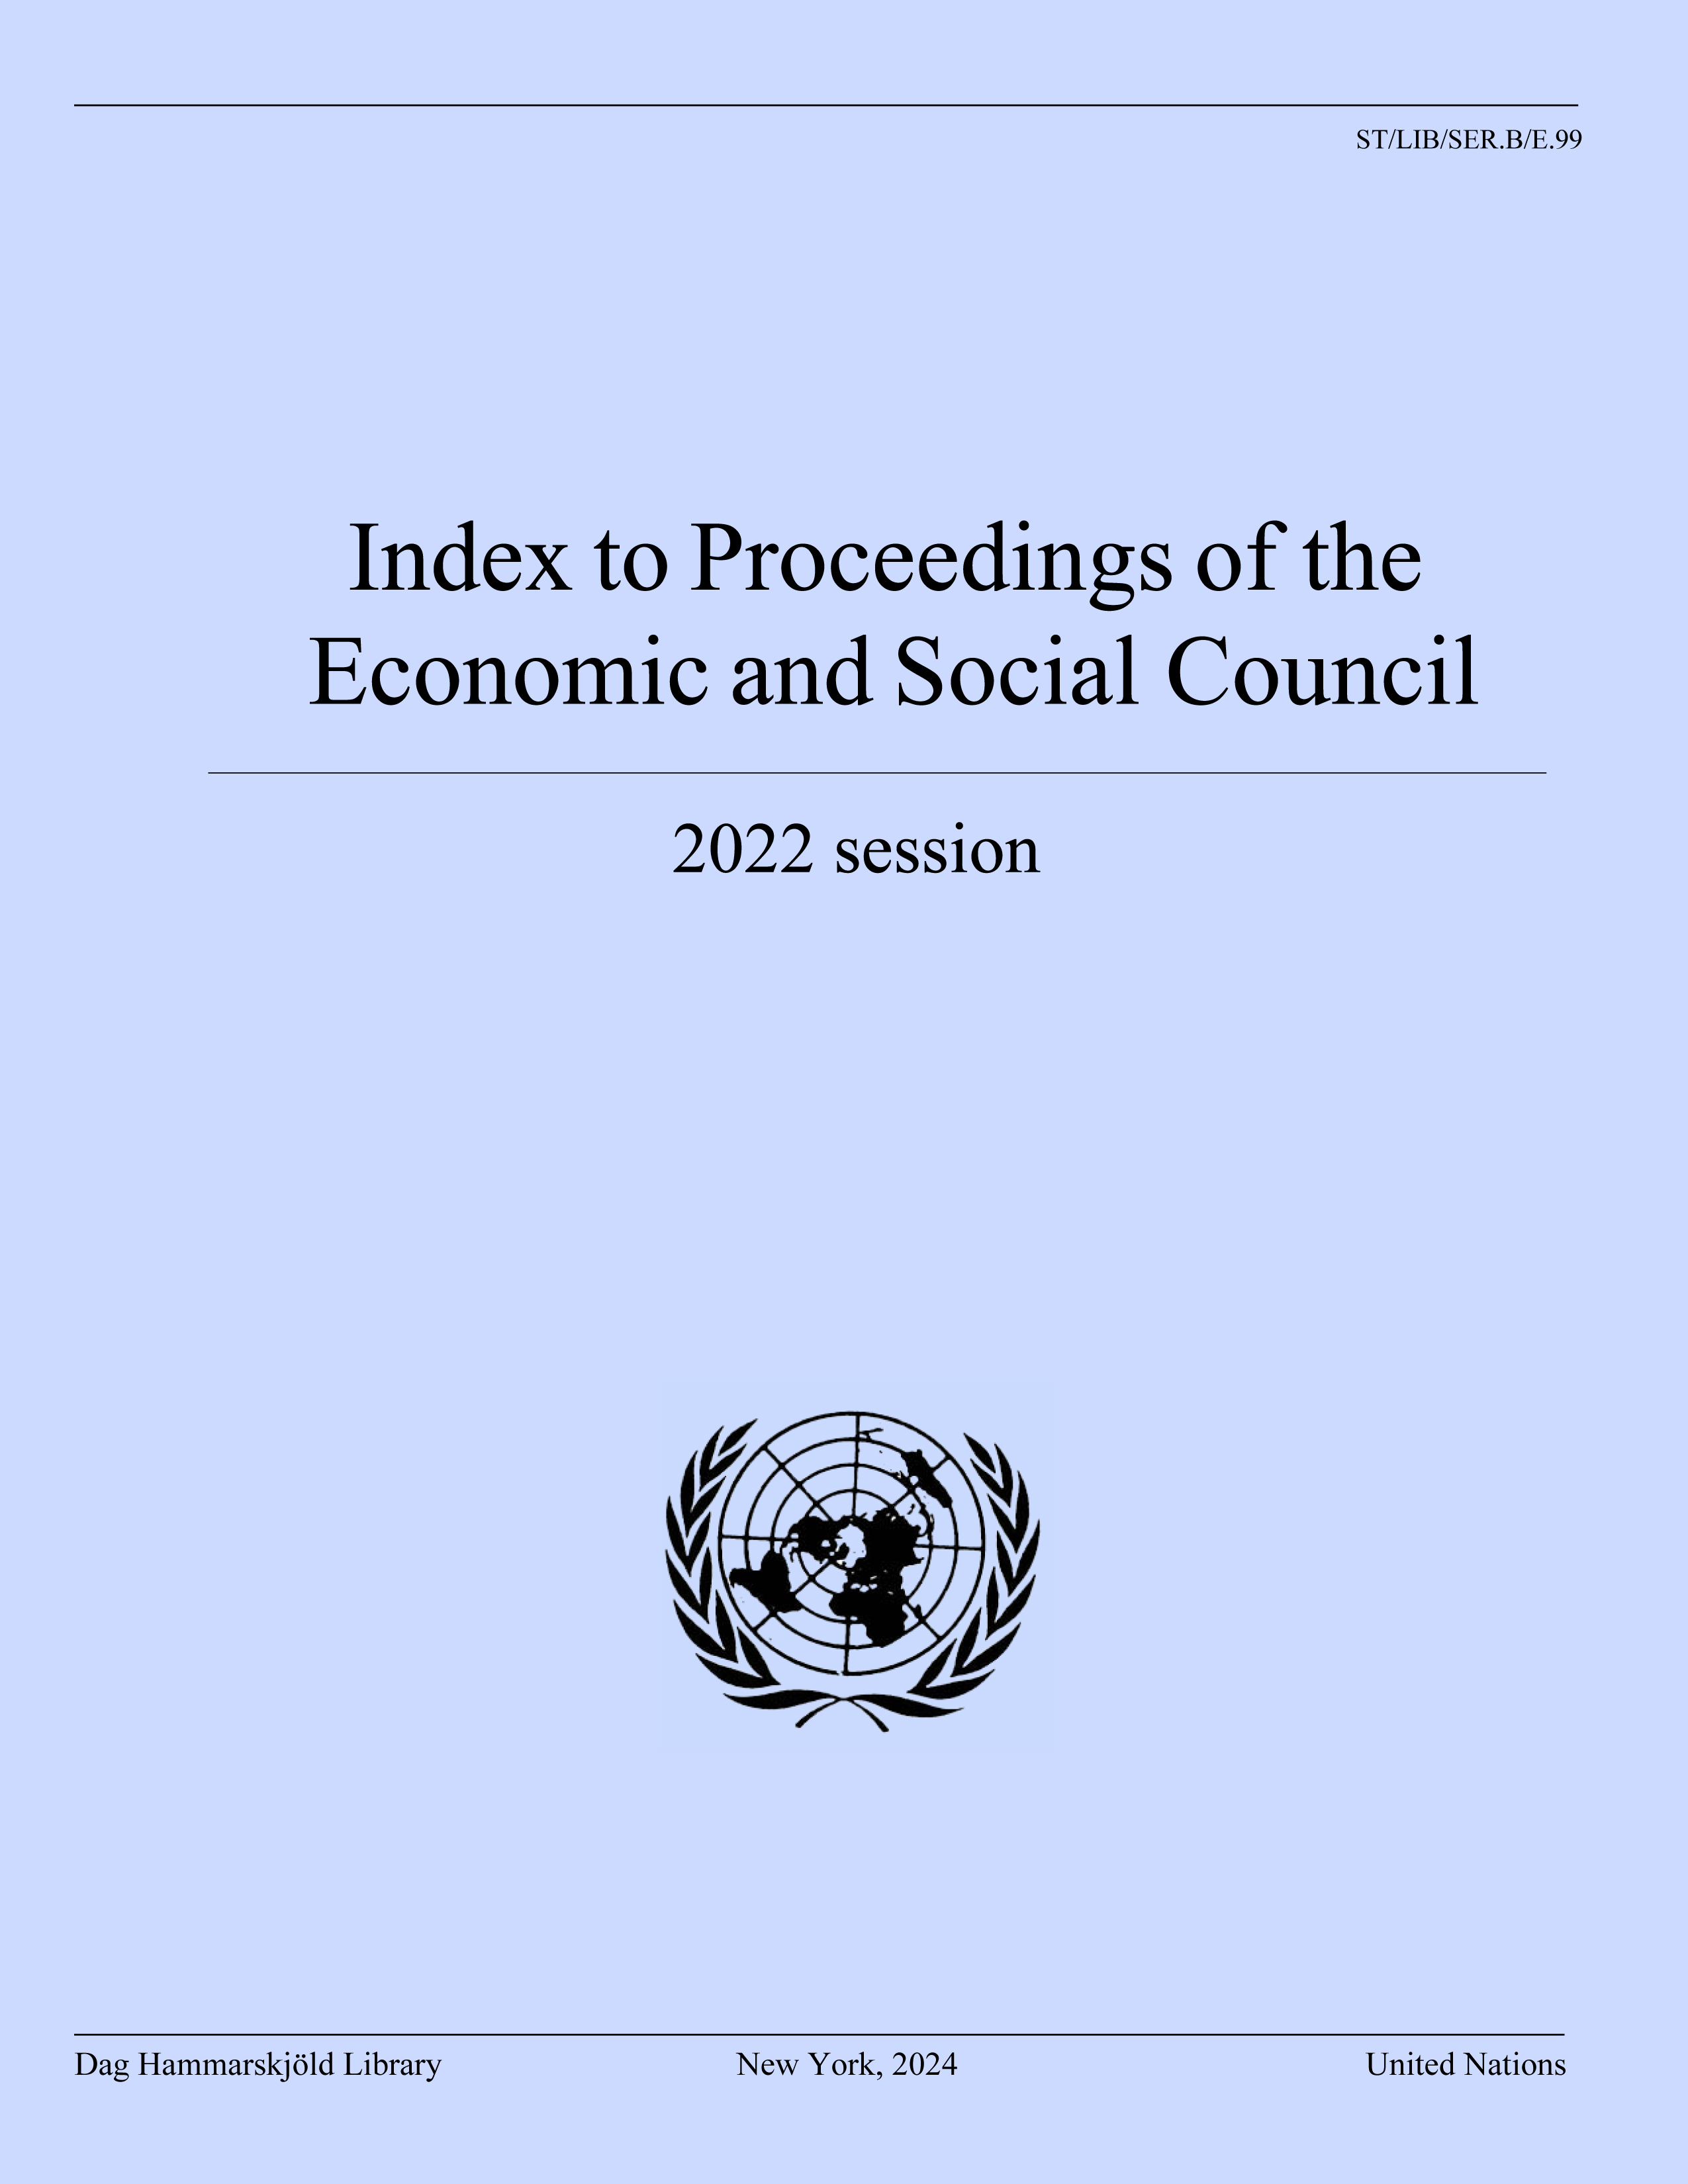 image of Index to Proceedings of the Economic and Social Council 2022